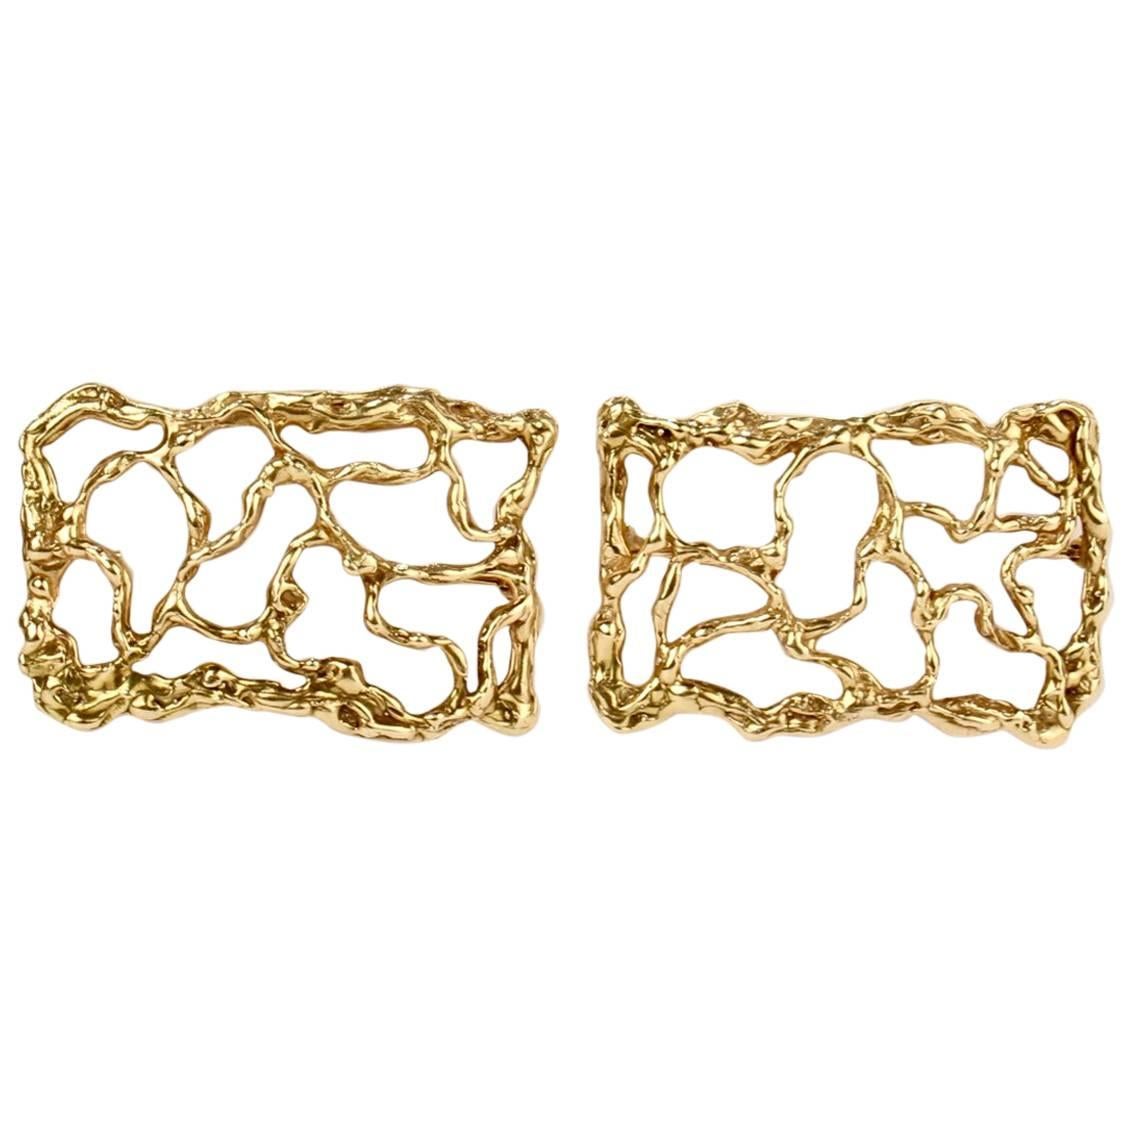 Pair of Artist Signed 14-Karat Gold Brutalist Brooches or Pins